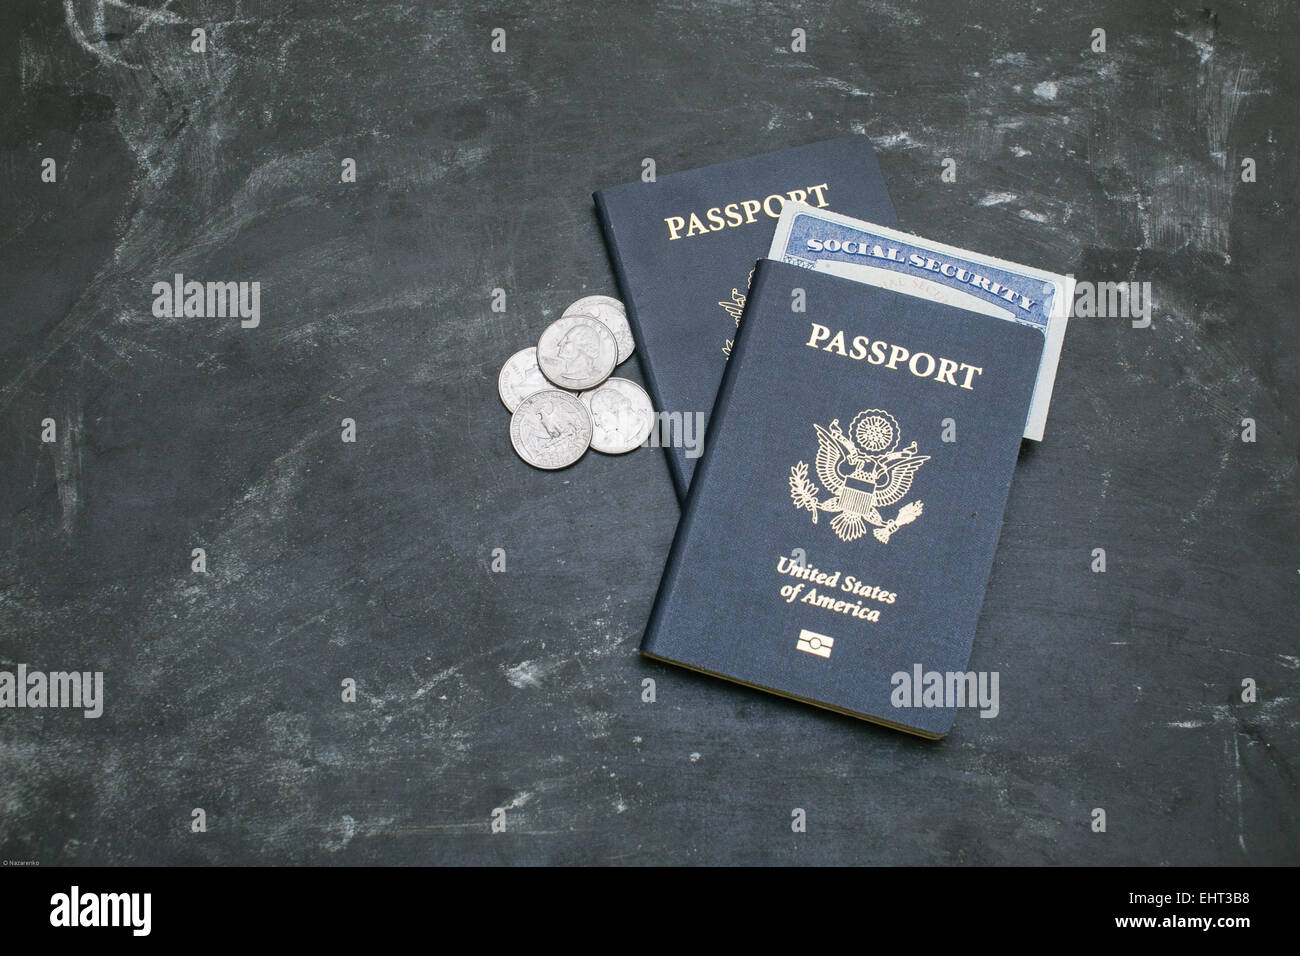 Two American passports on black background. American citizenship. Social security card in a document. Traveling around the world Stock Photo